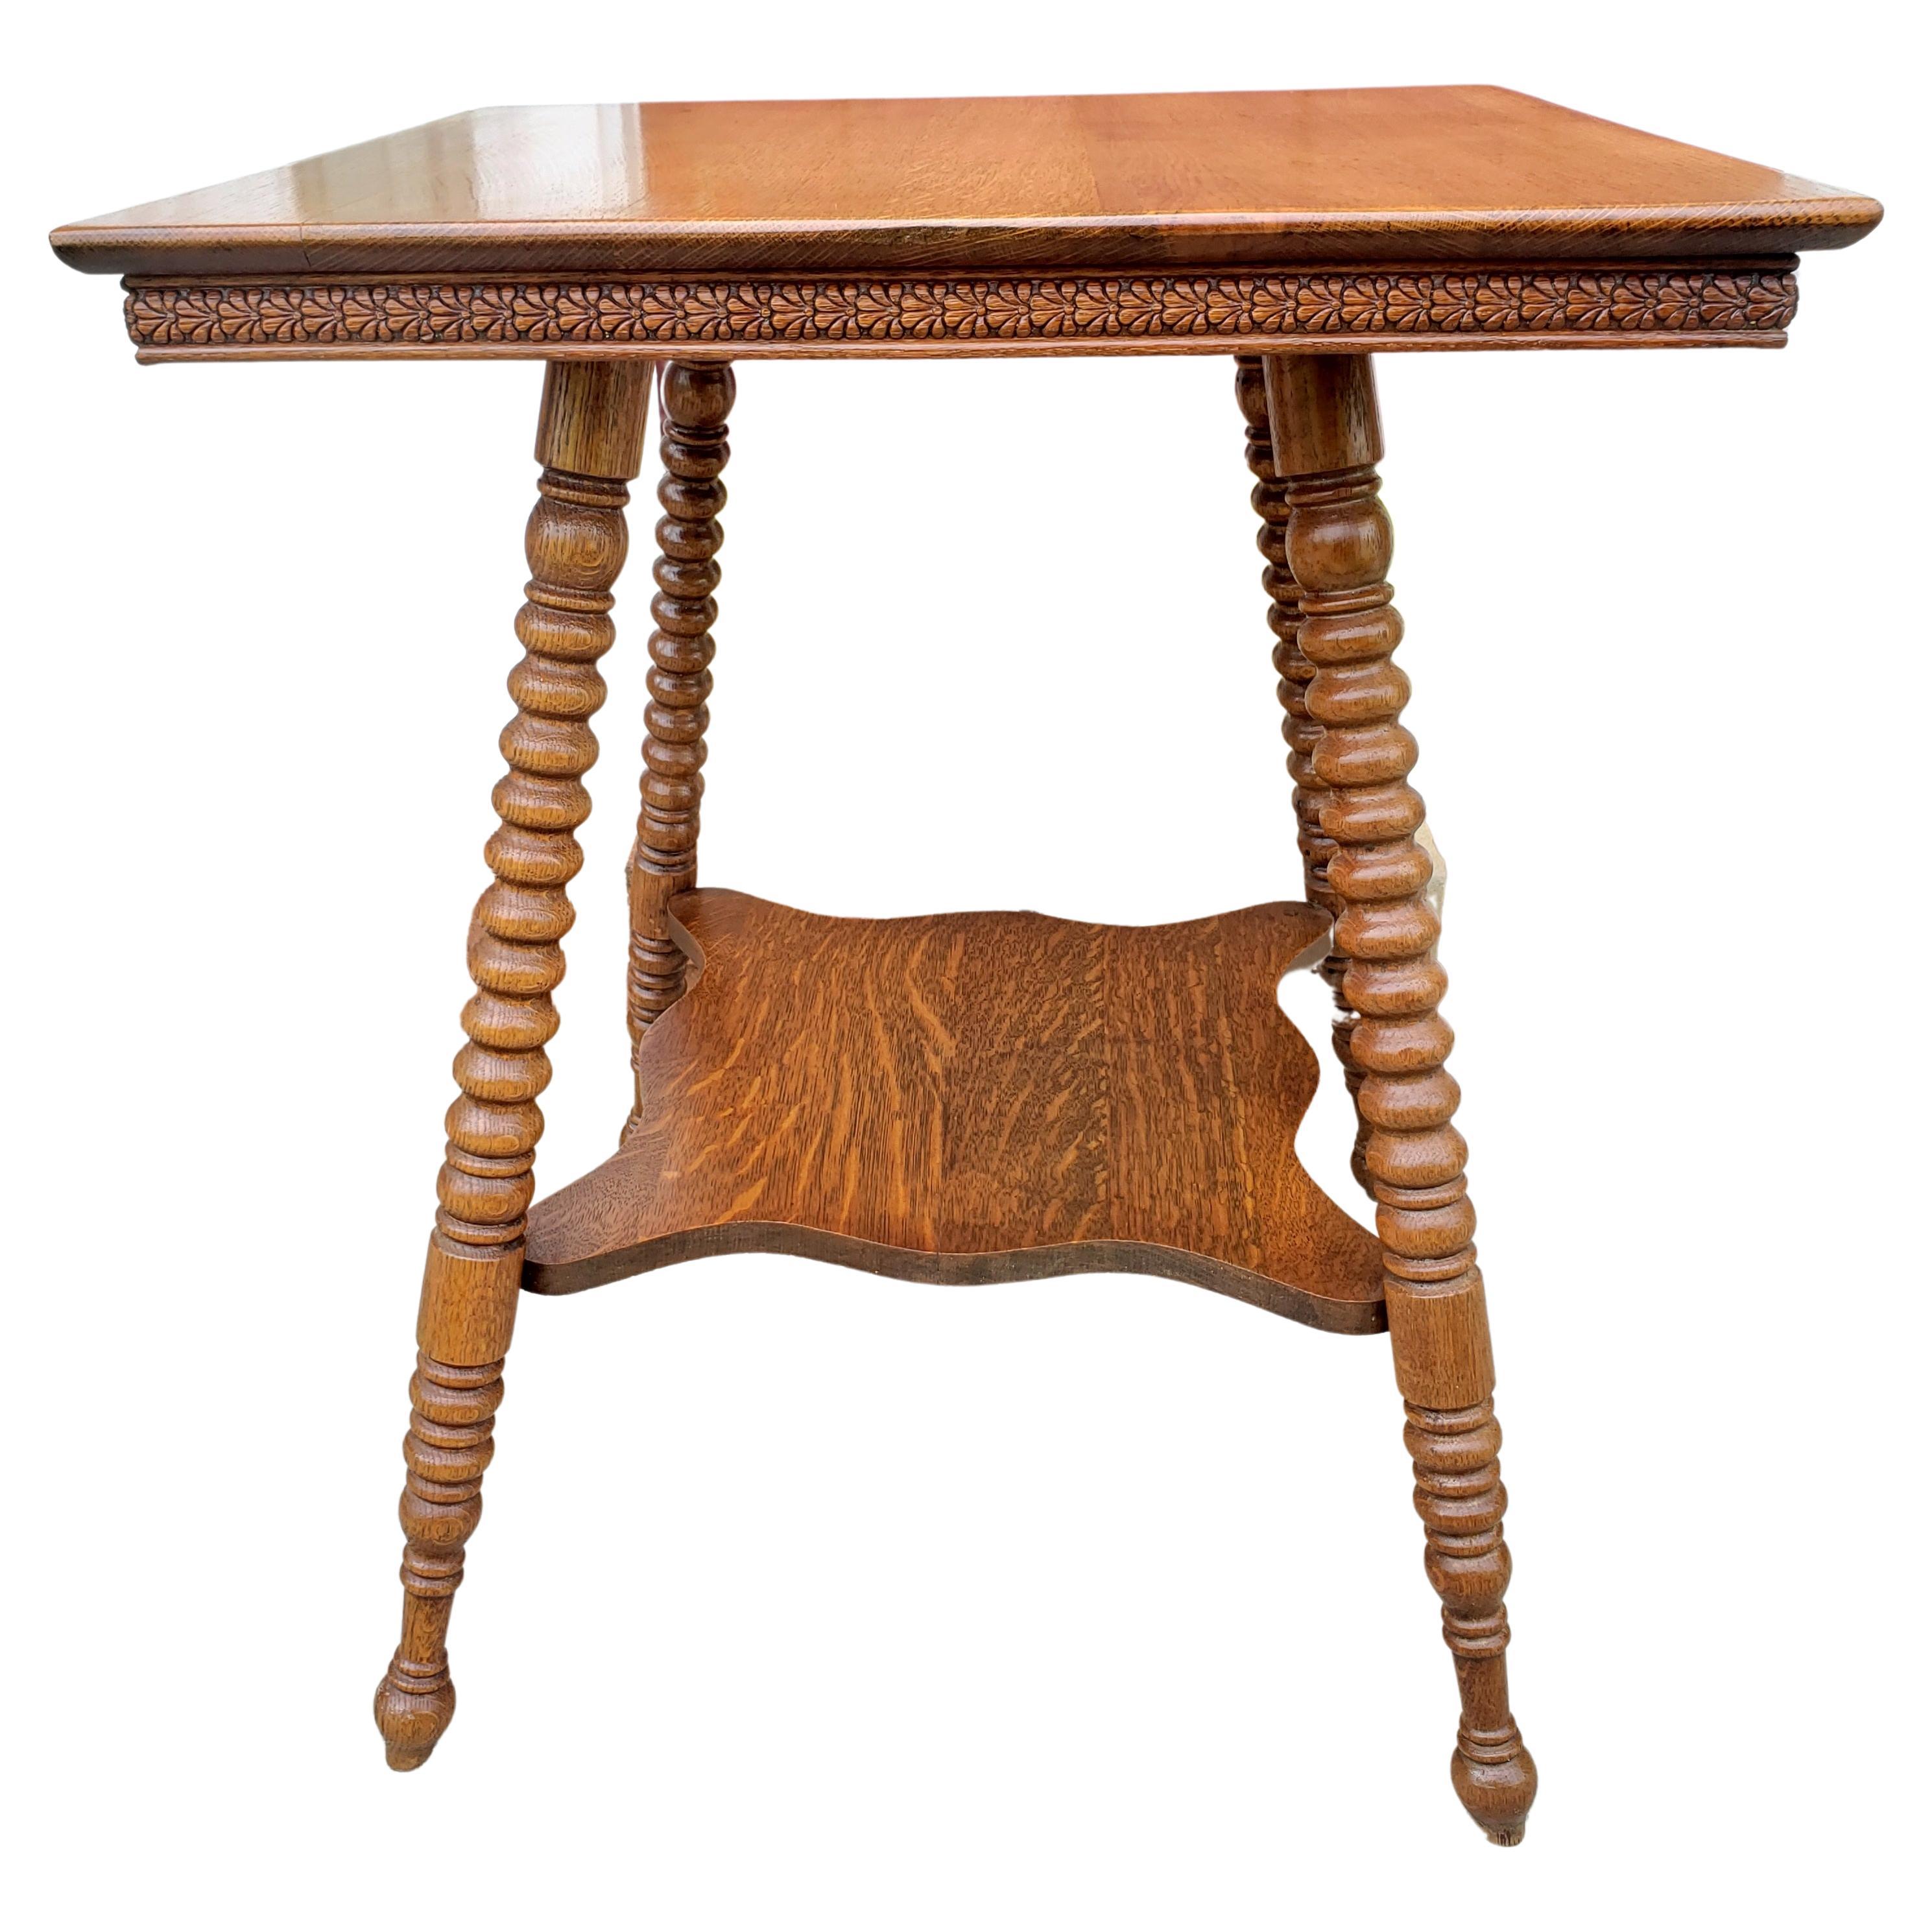 1930s square Two-Tier Bobbin legs Parlor table, tea table with hand carved edges. Measures 23.5